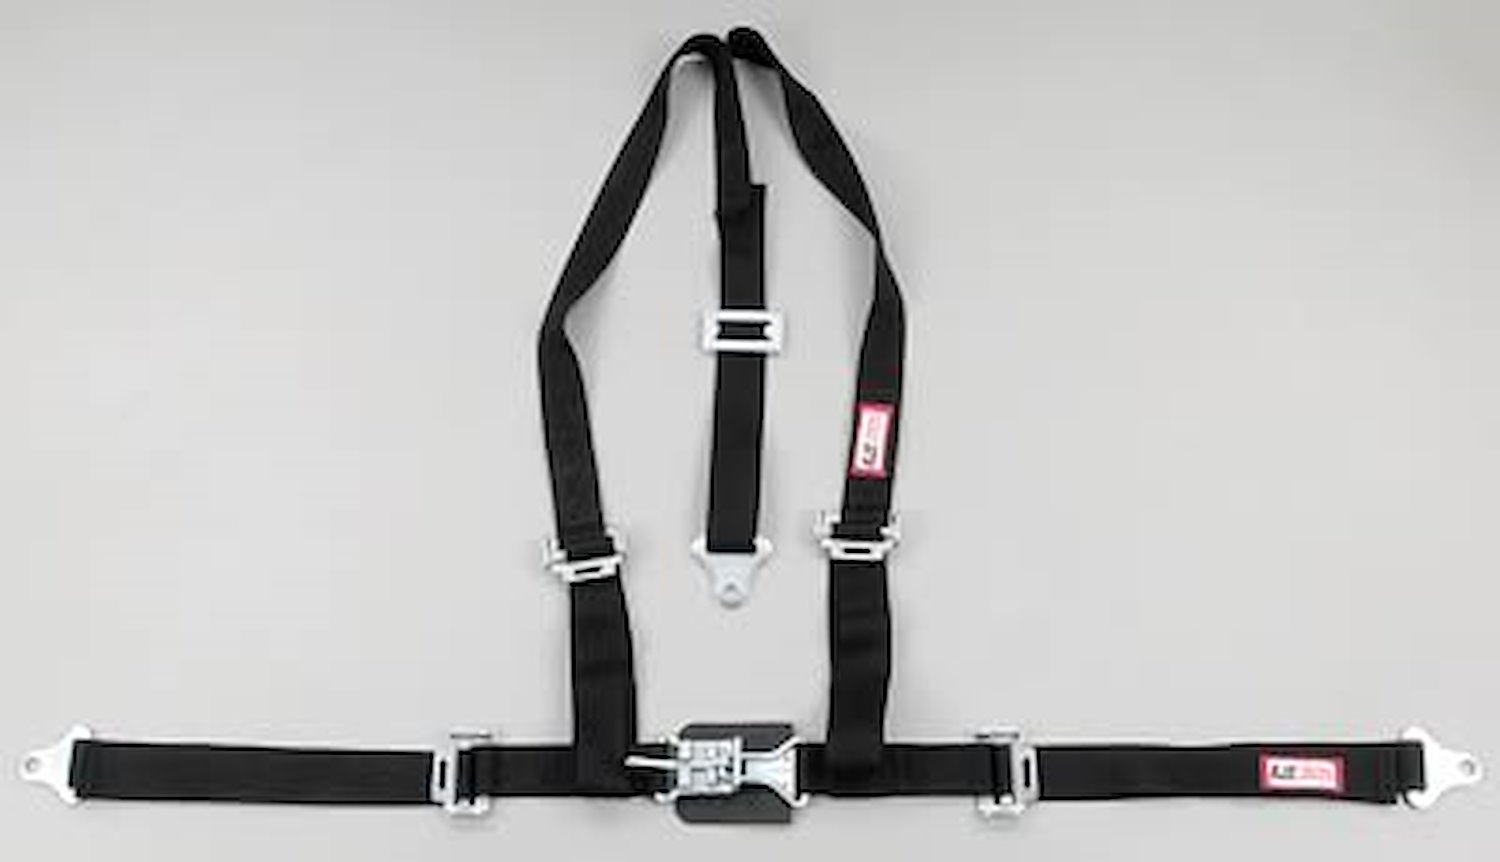 NON-SFI L&L HARNESS 2 PULL DOWN Lap Belt SNAP SEWN IN 2 S.H. INDIVIDUAL FLOOR Mount w/STERNUM STRAP WRAP/BOLT GRAY